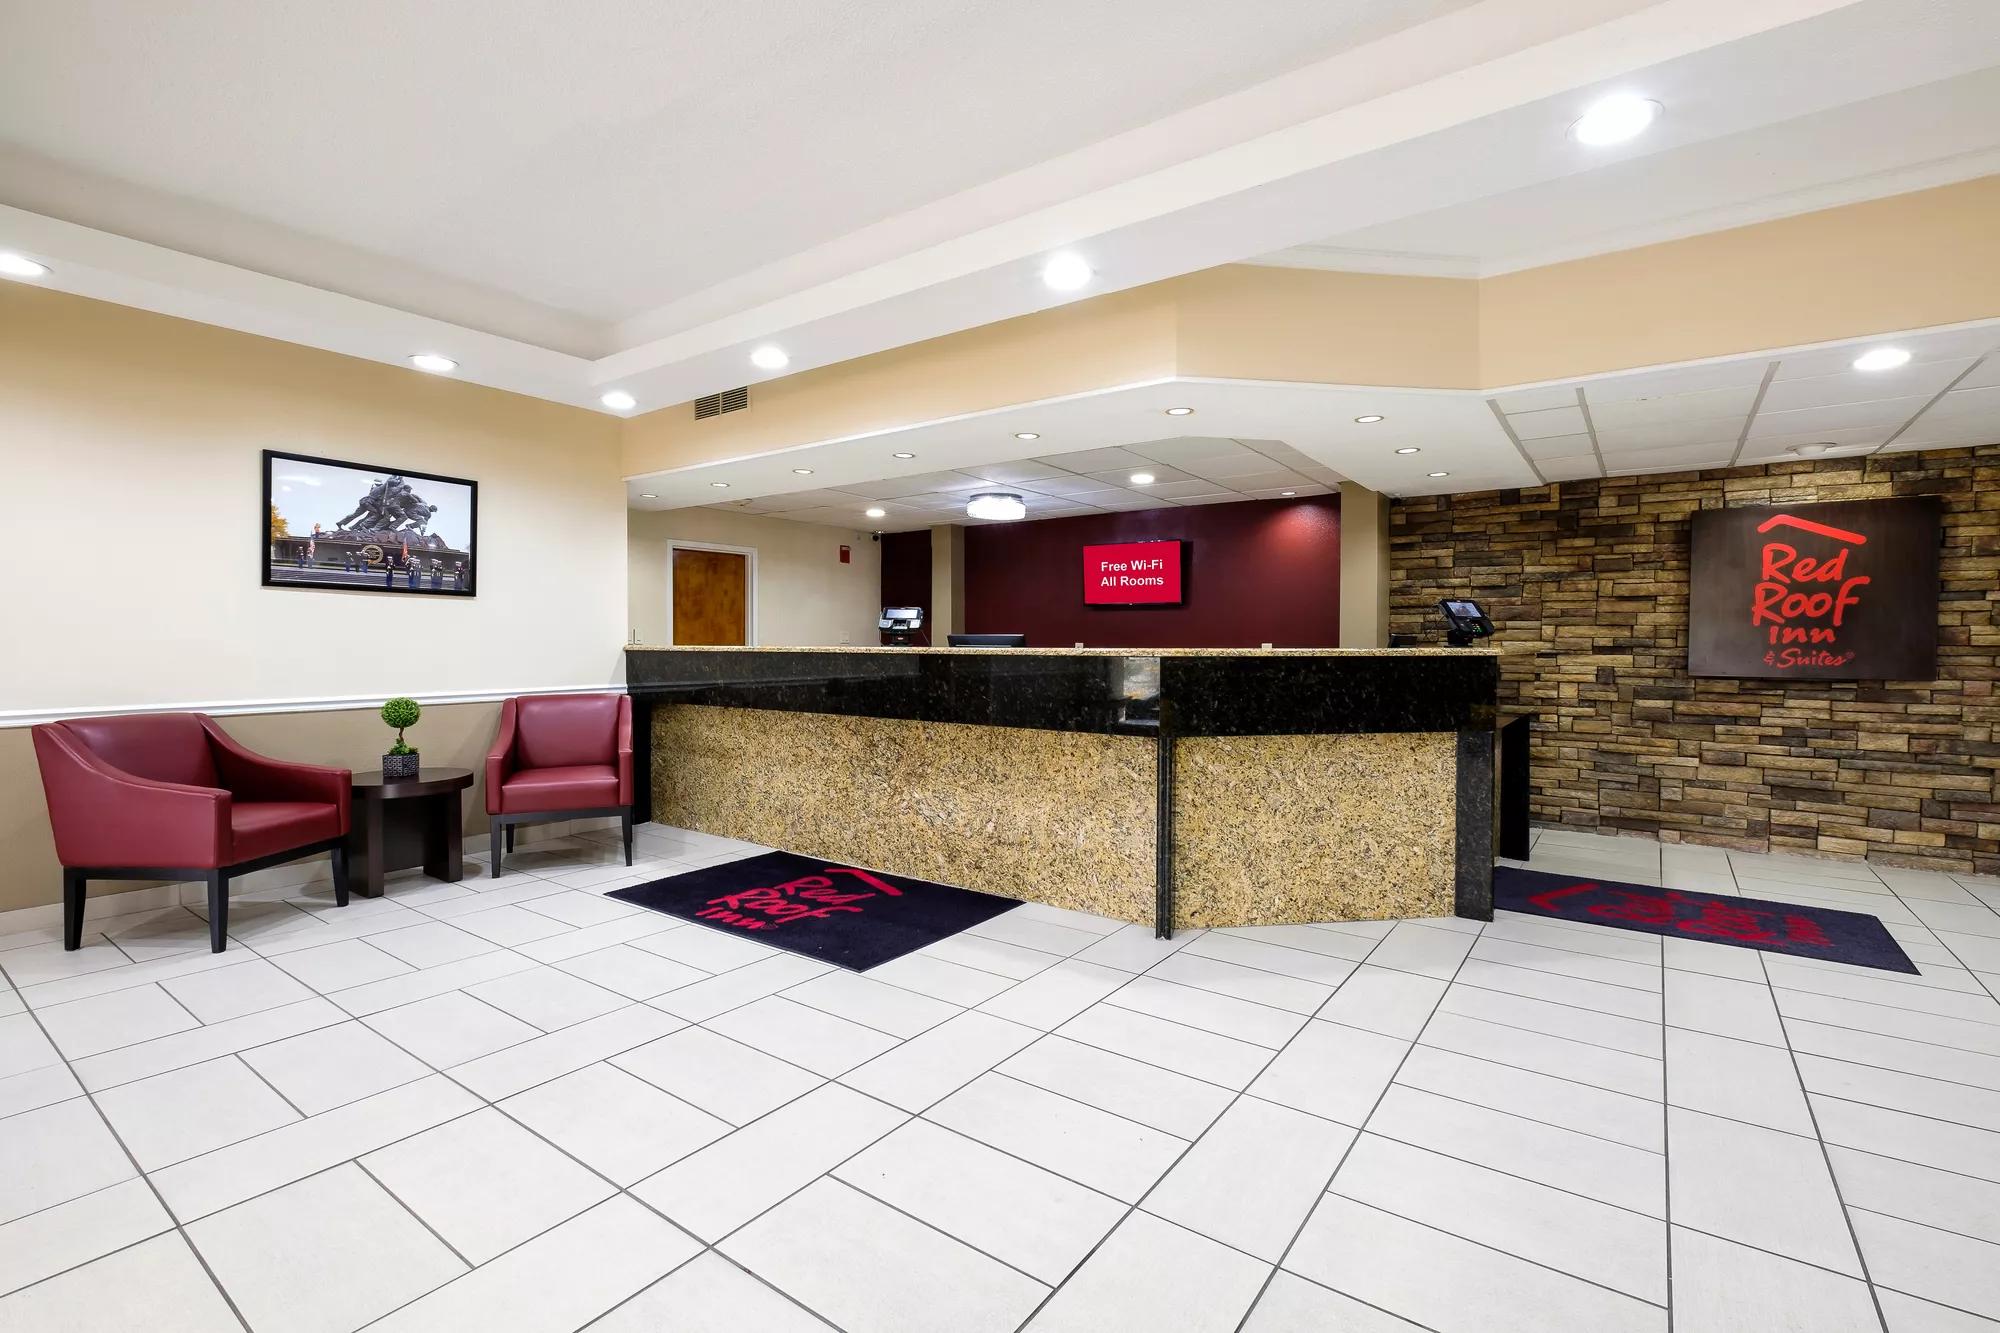 Red Roof Inn & Suites Jacksonville, NC Front Desk and Lobby Area Image